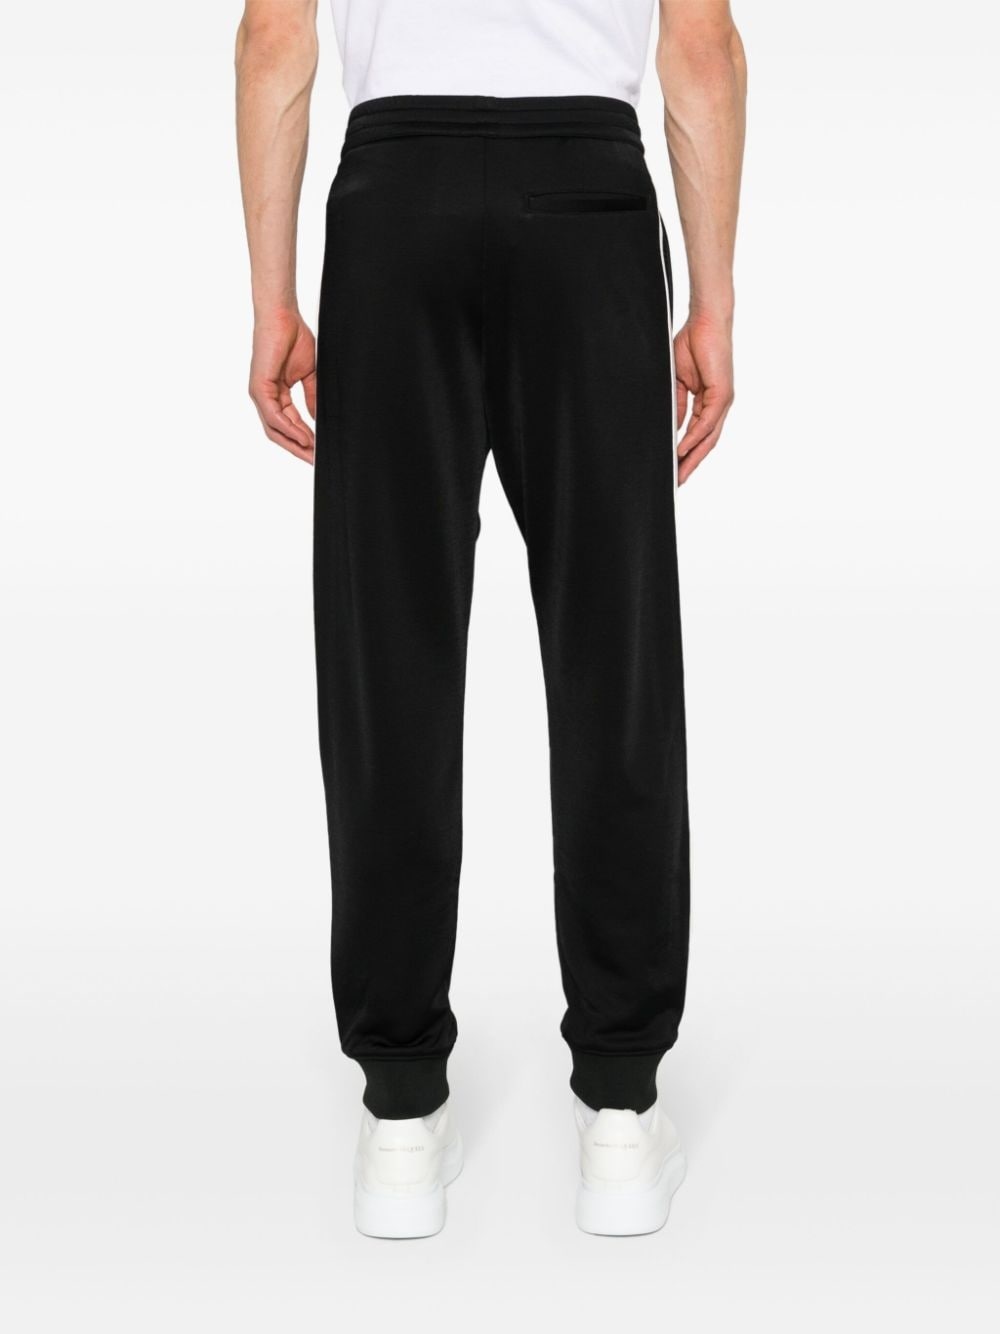 embroidered-logo contrast-panel track pants - 4